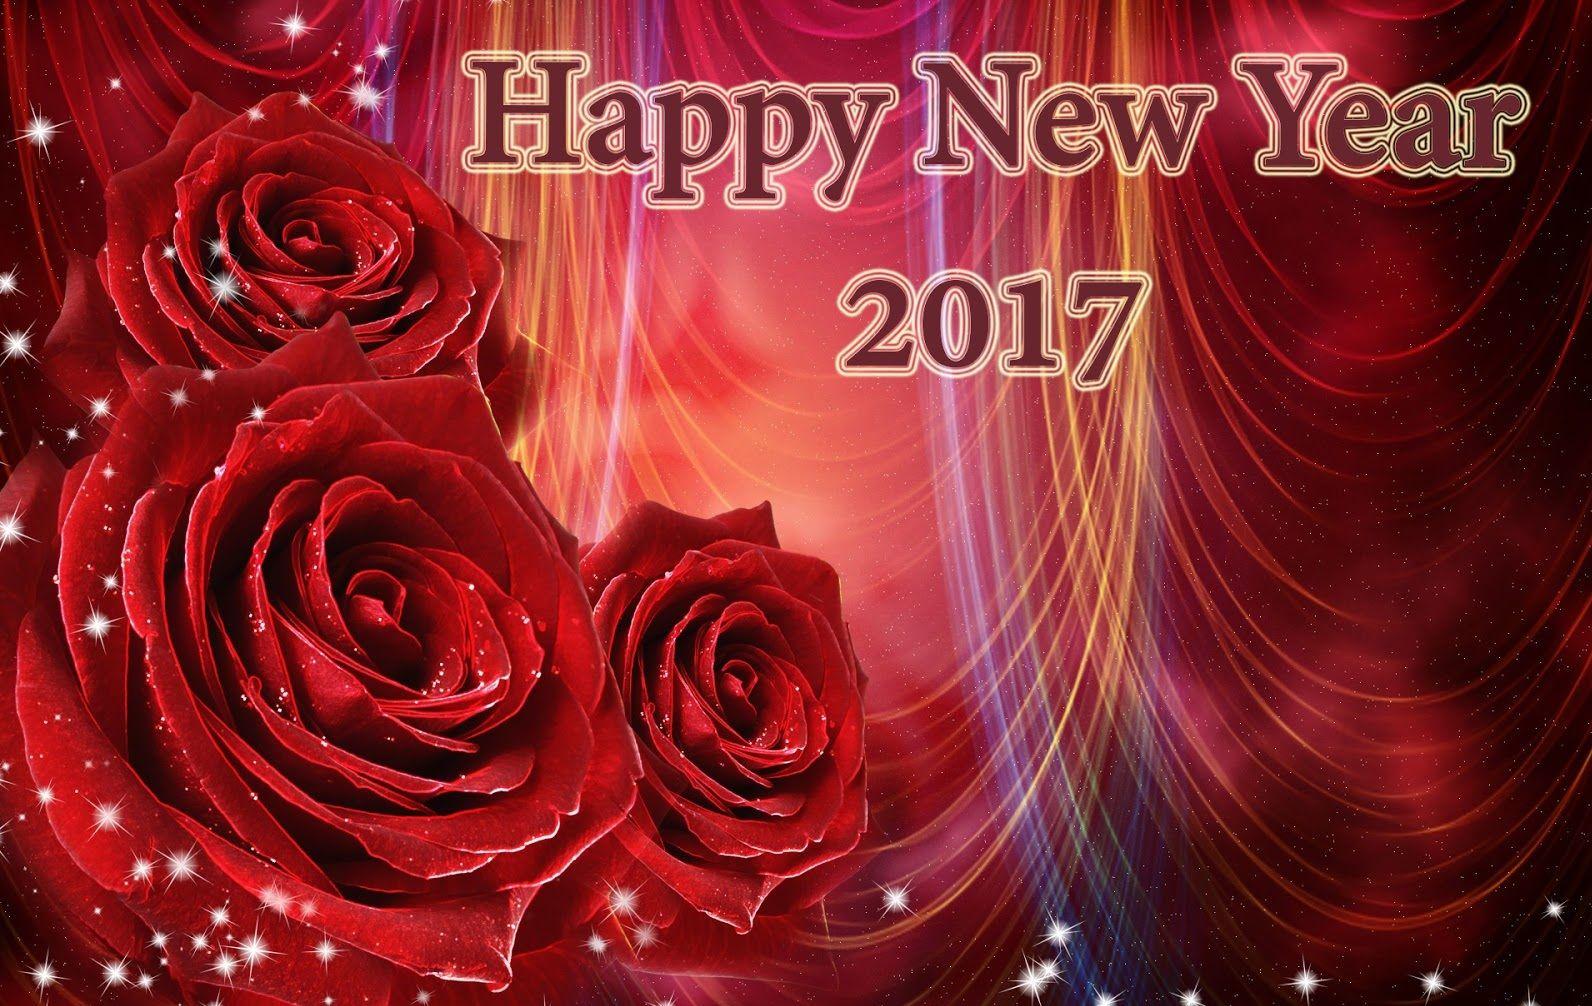 Happy New Year 2017 HD Wallpaper, Image, Picture New Year